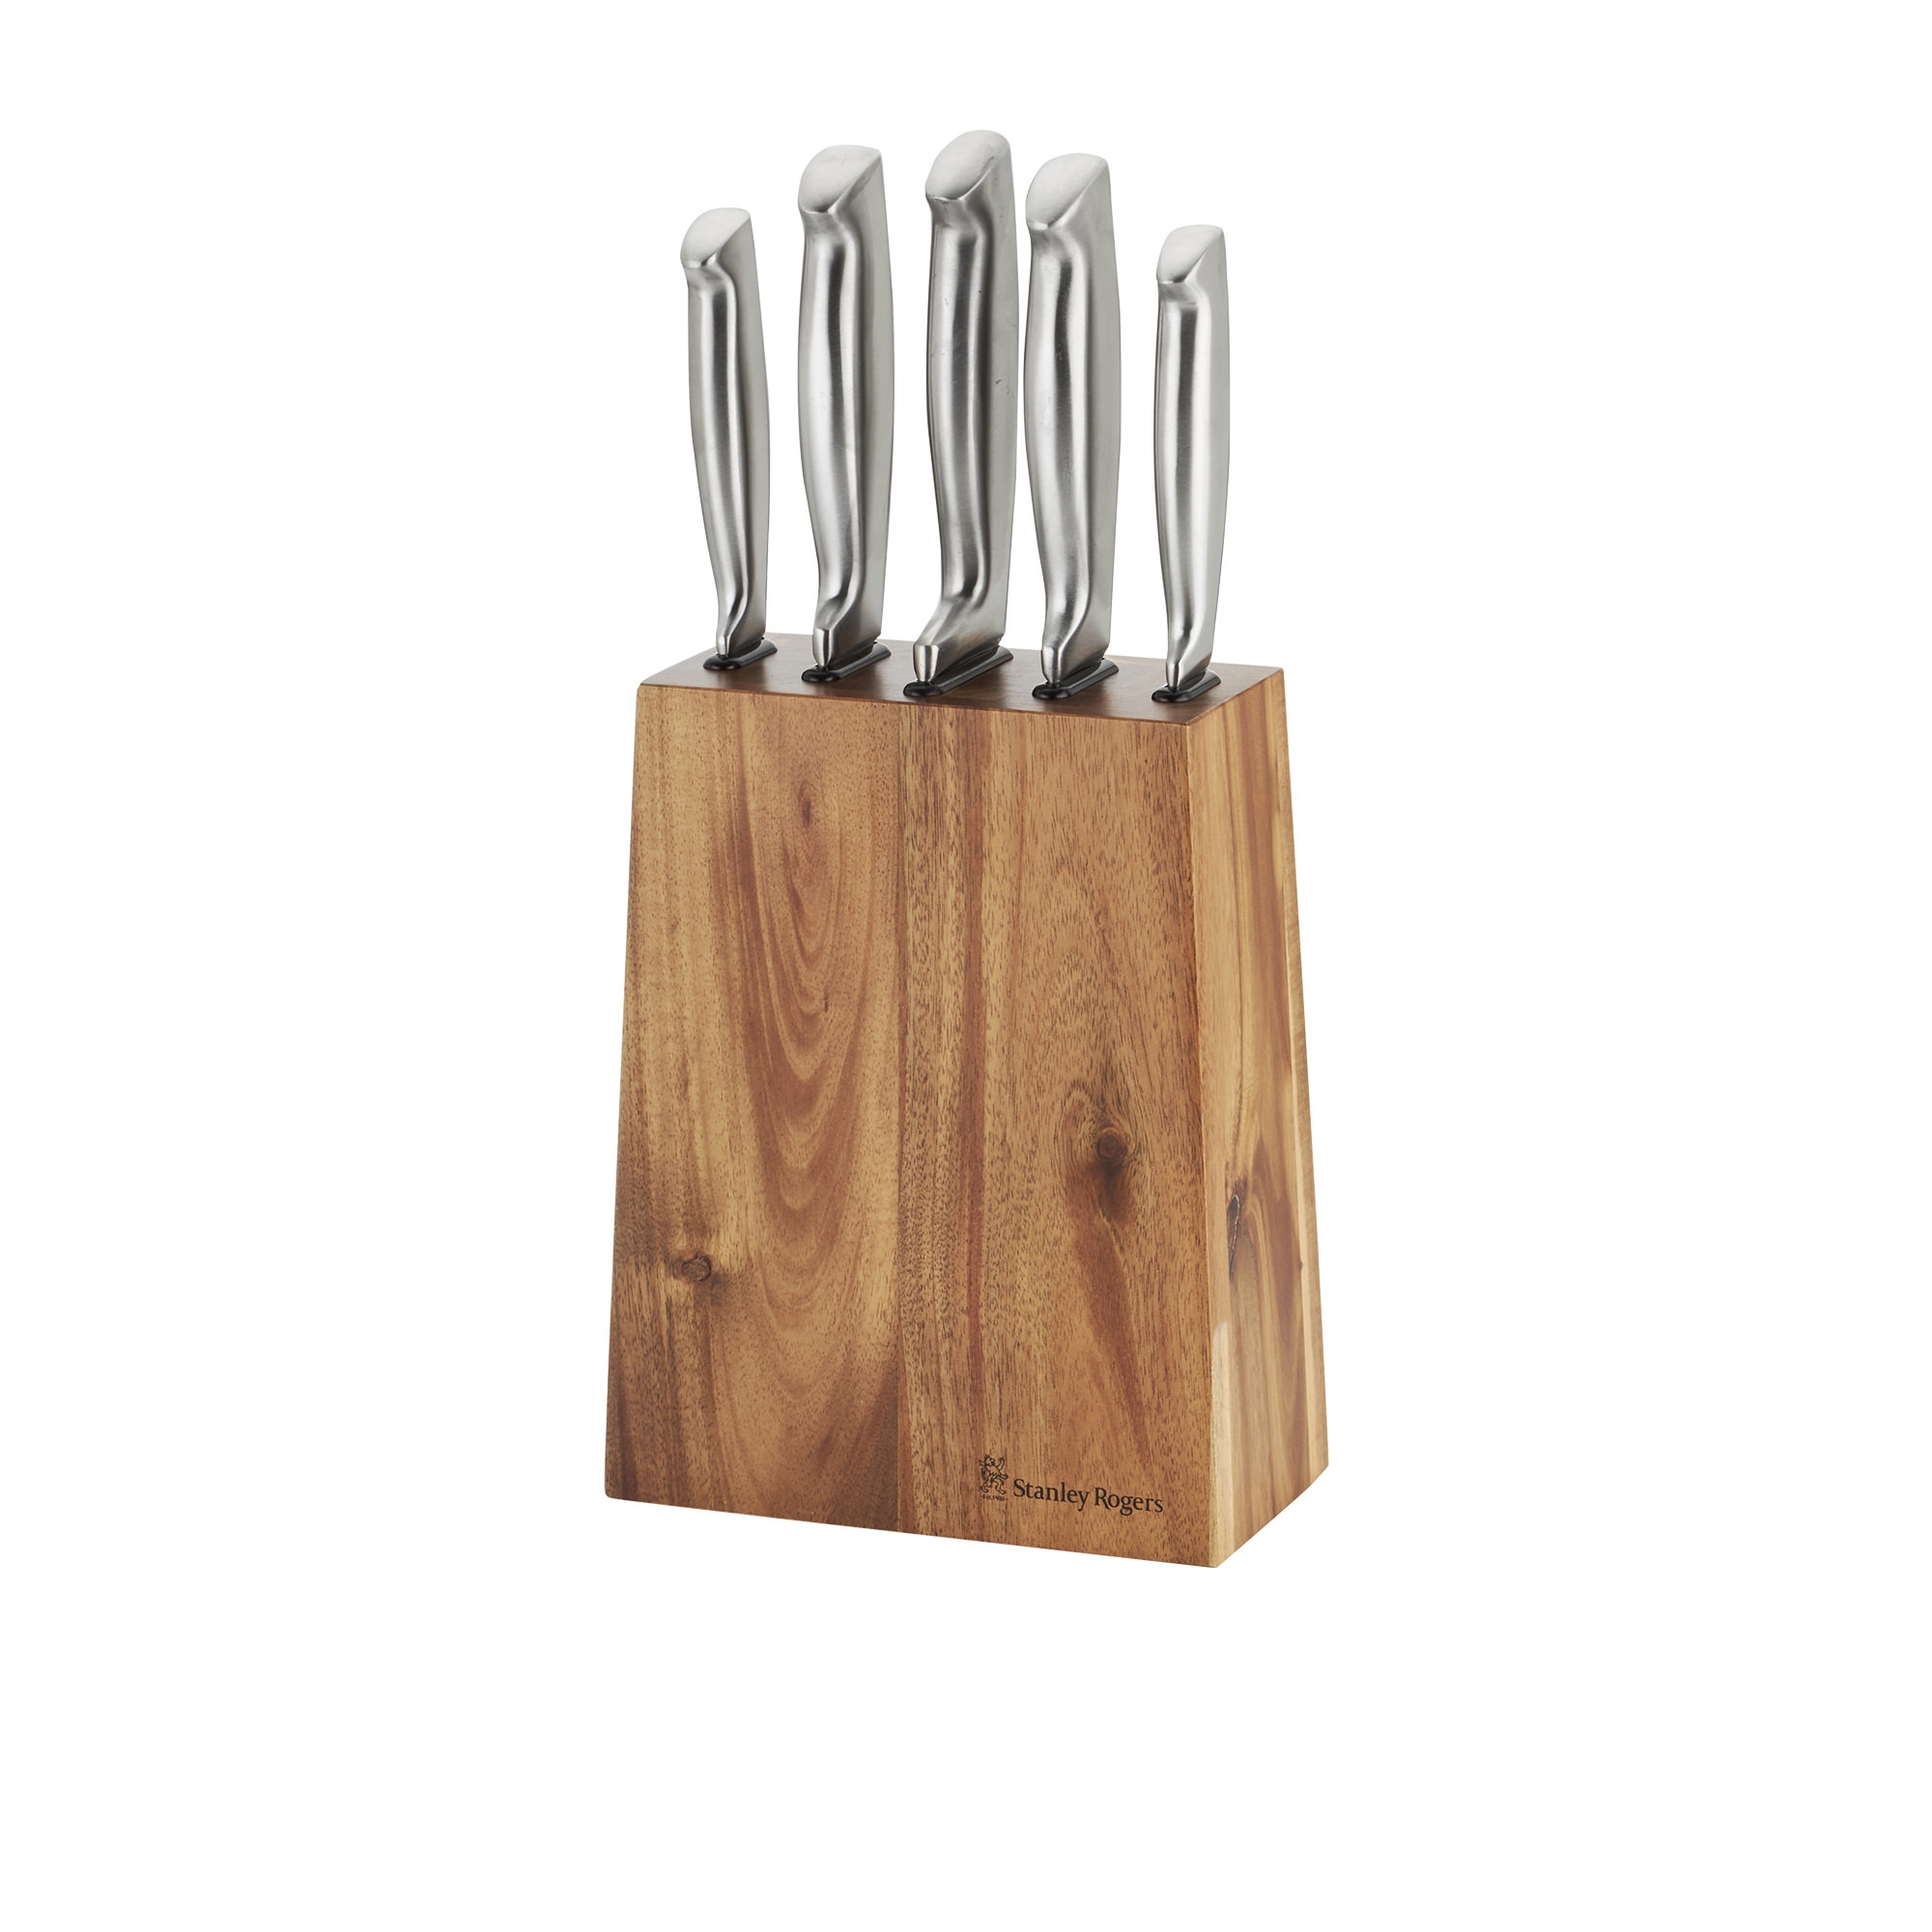 Stanley Rogers 6pc Tapered Vertical Knife Block Set Image 1